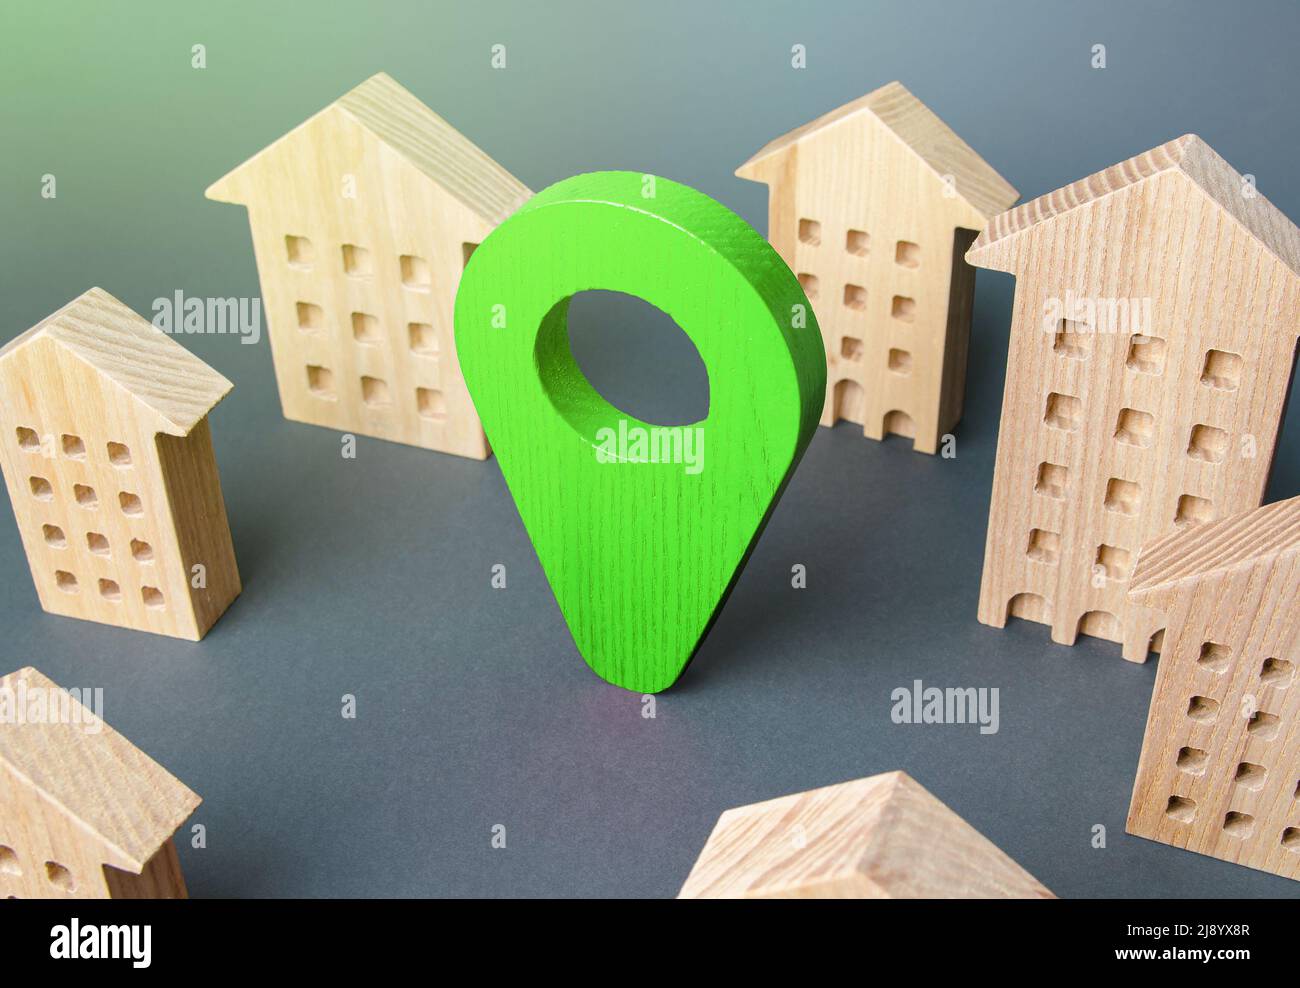 Green location indicator among houses. Delivery. Tracking and navigation. Internet of things, city management and city services municipal. Business ad Stock Photo